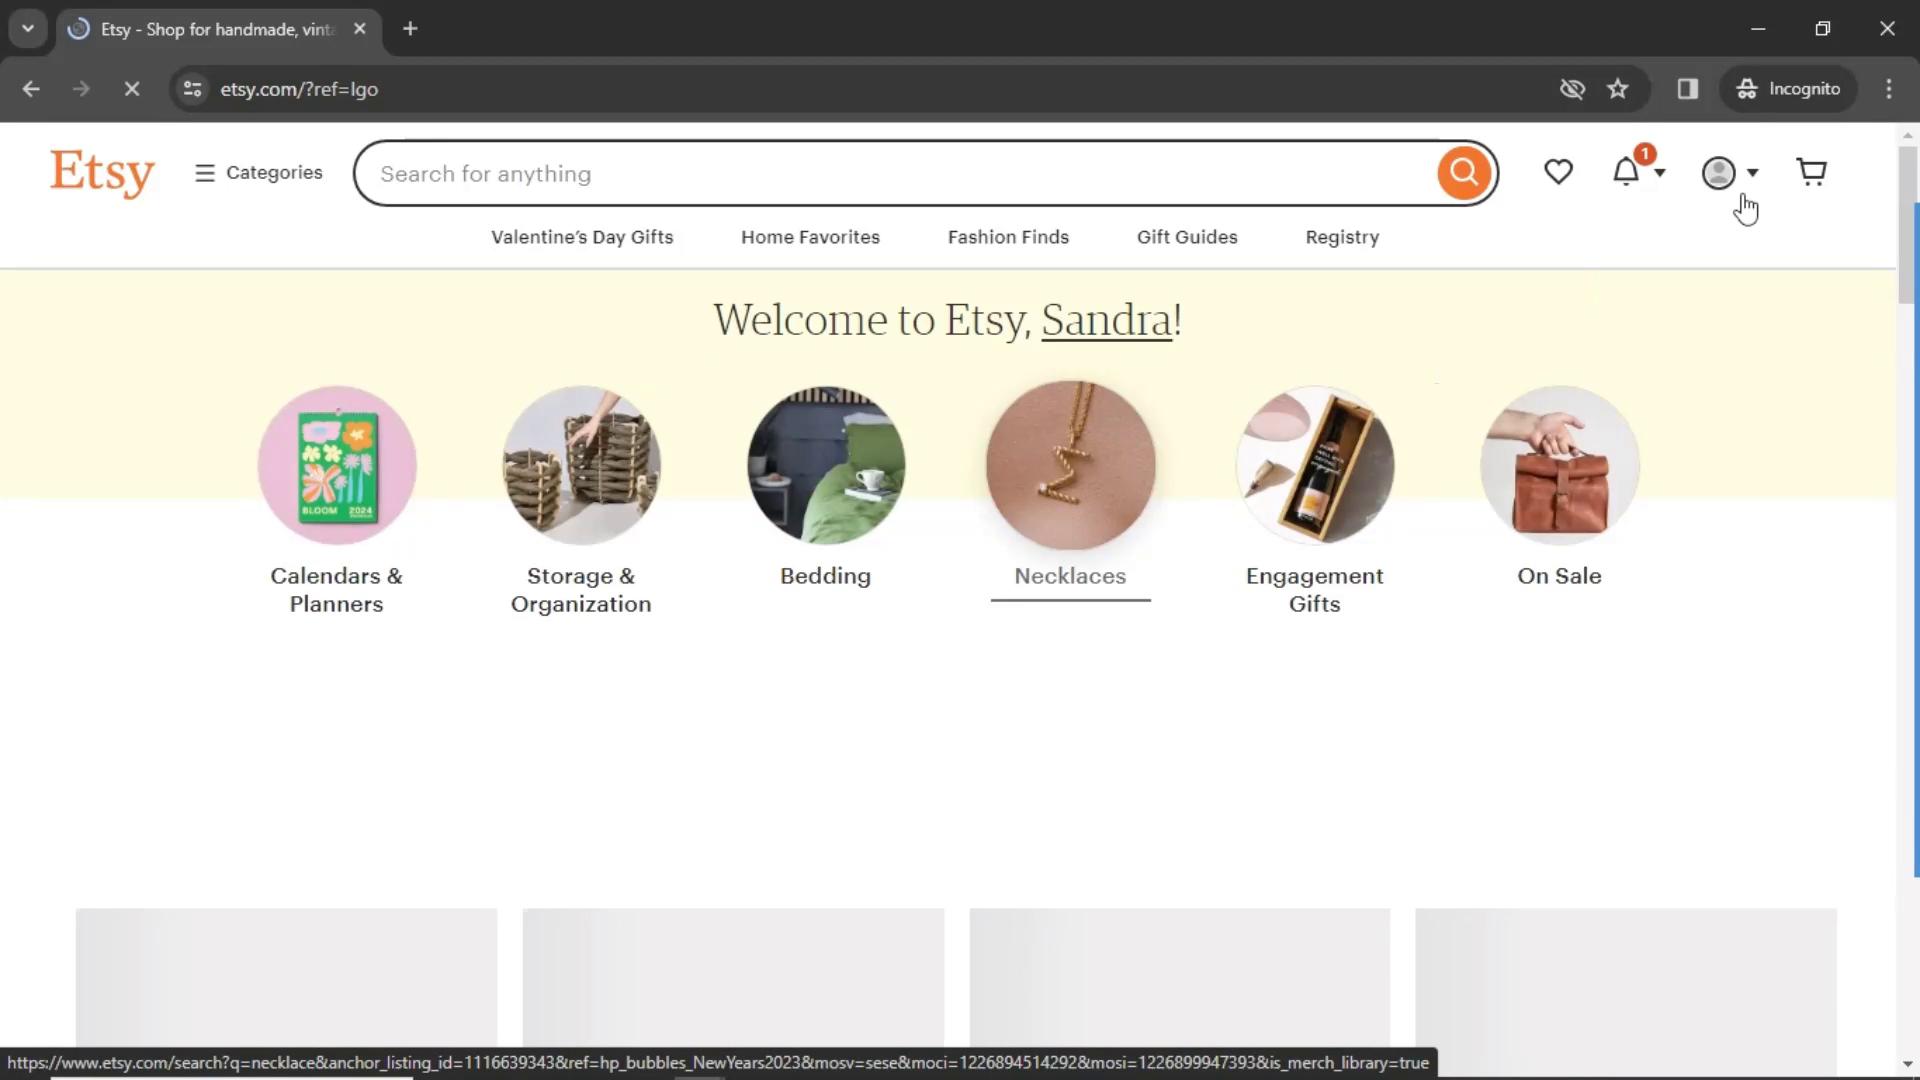 Updating your profile on Etsy video screenshot